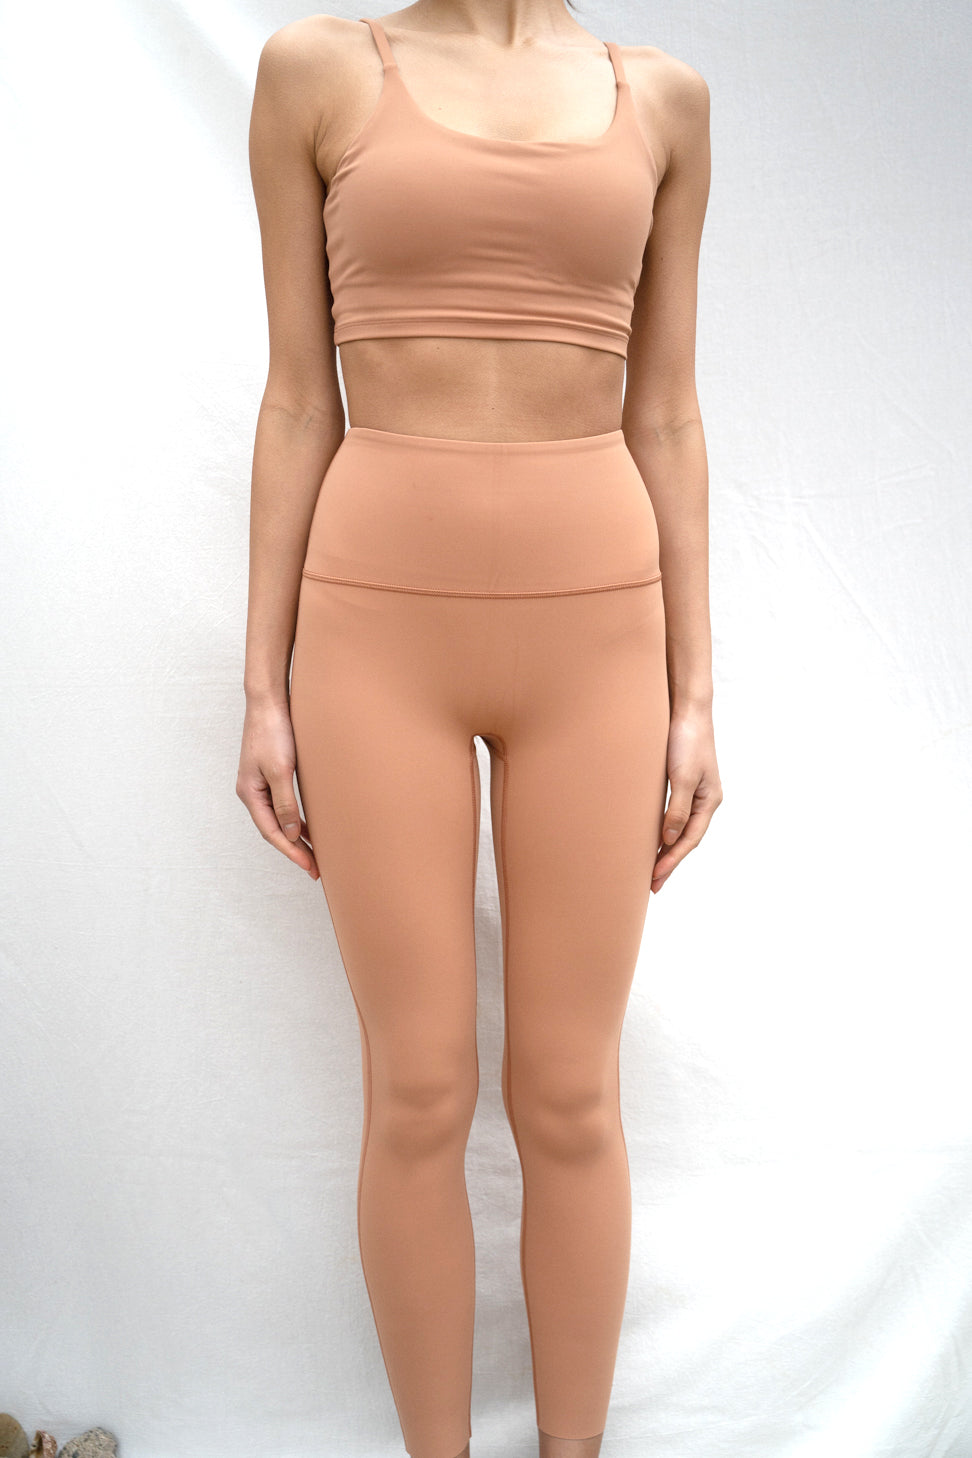 Basic Top CINNAMON - SWELLY ONLINE STORE